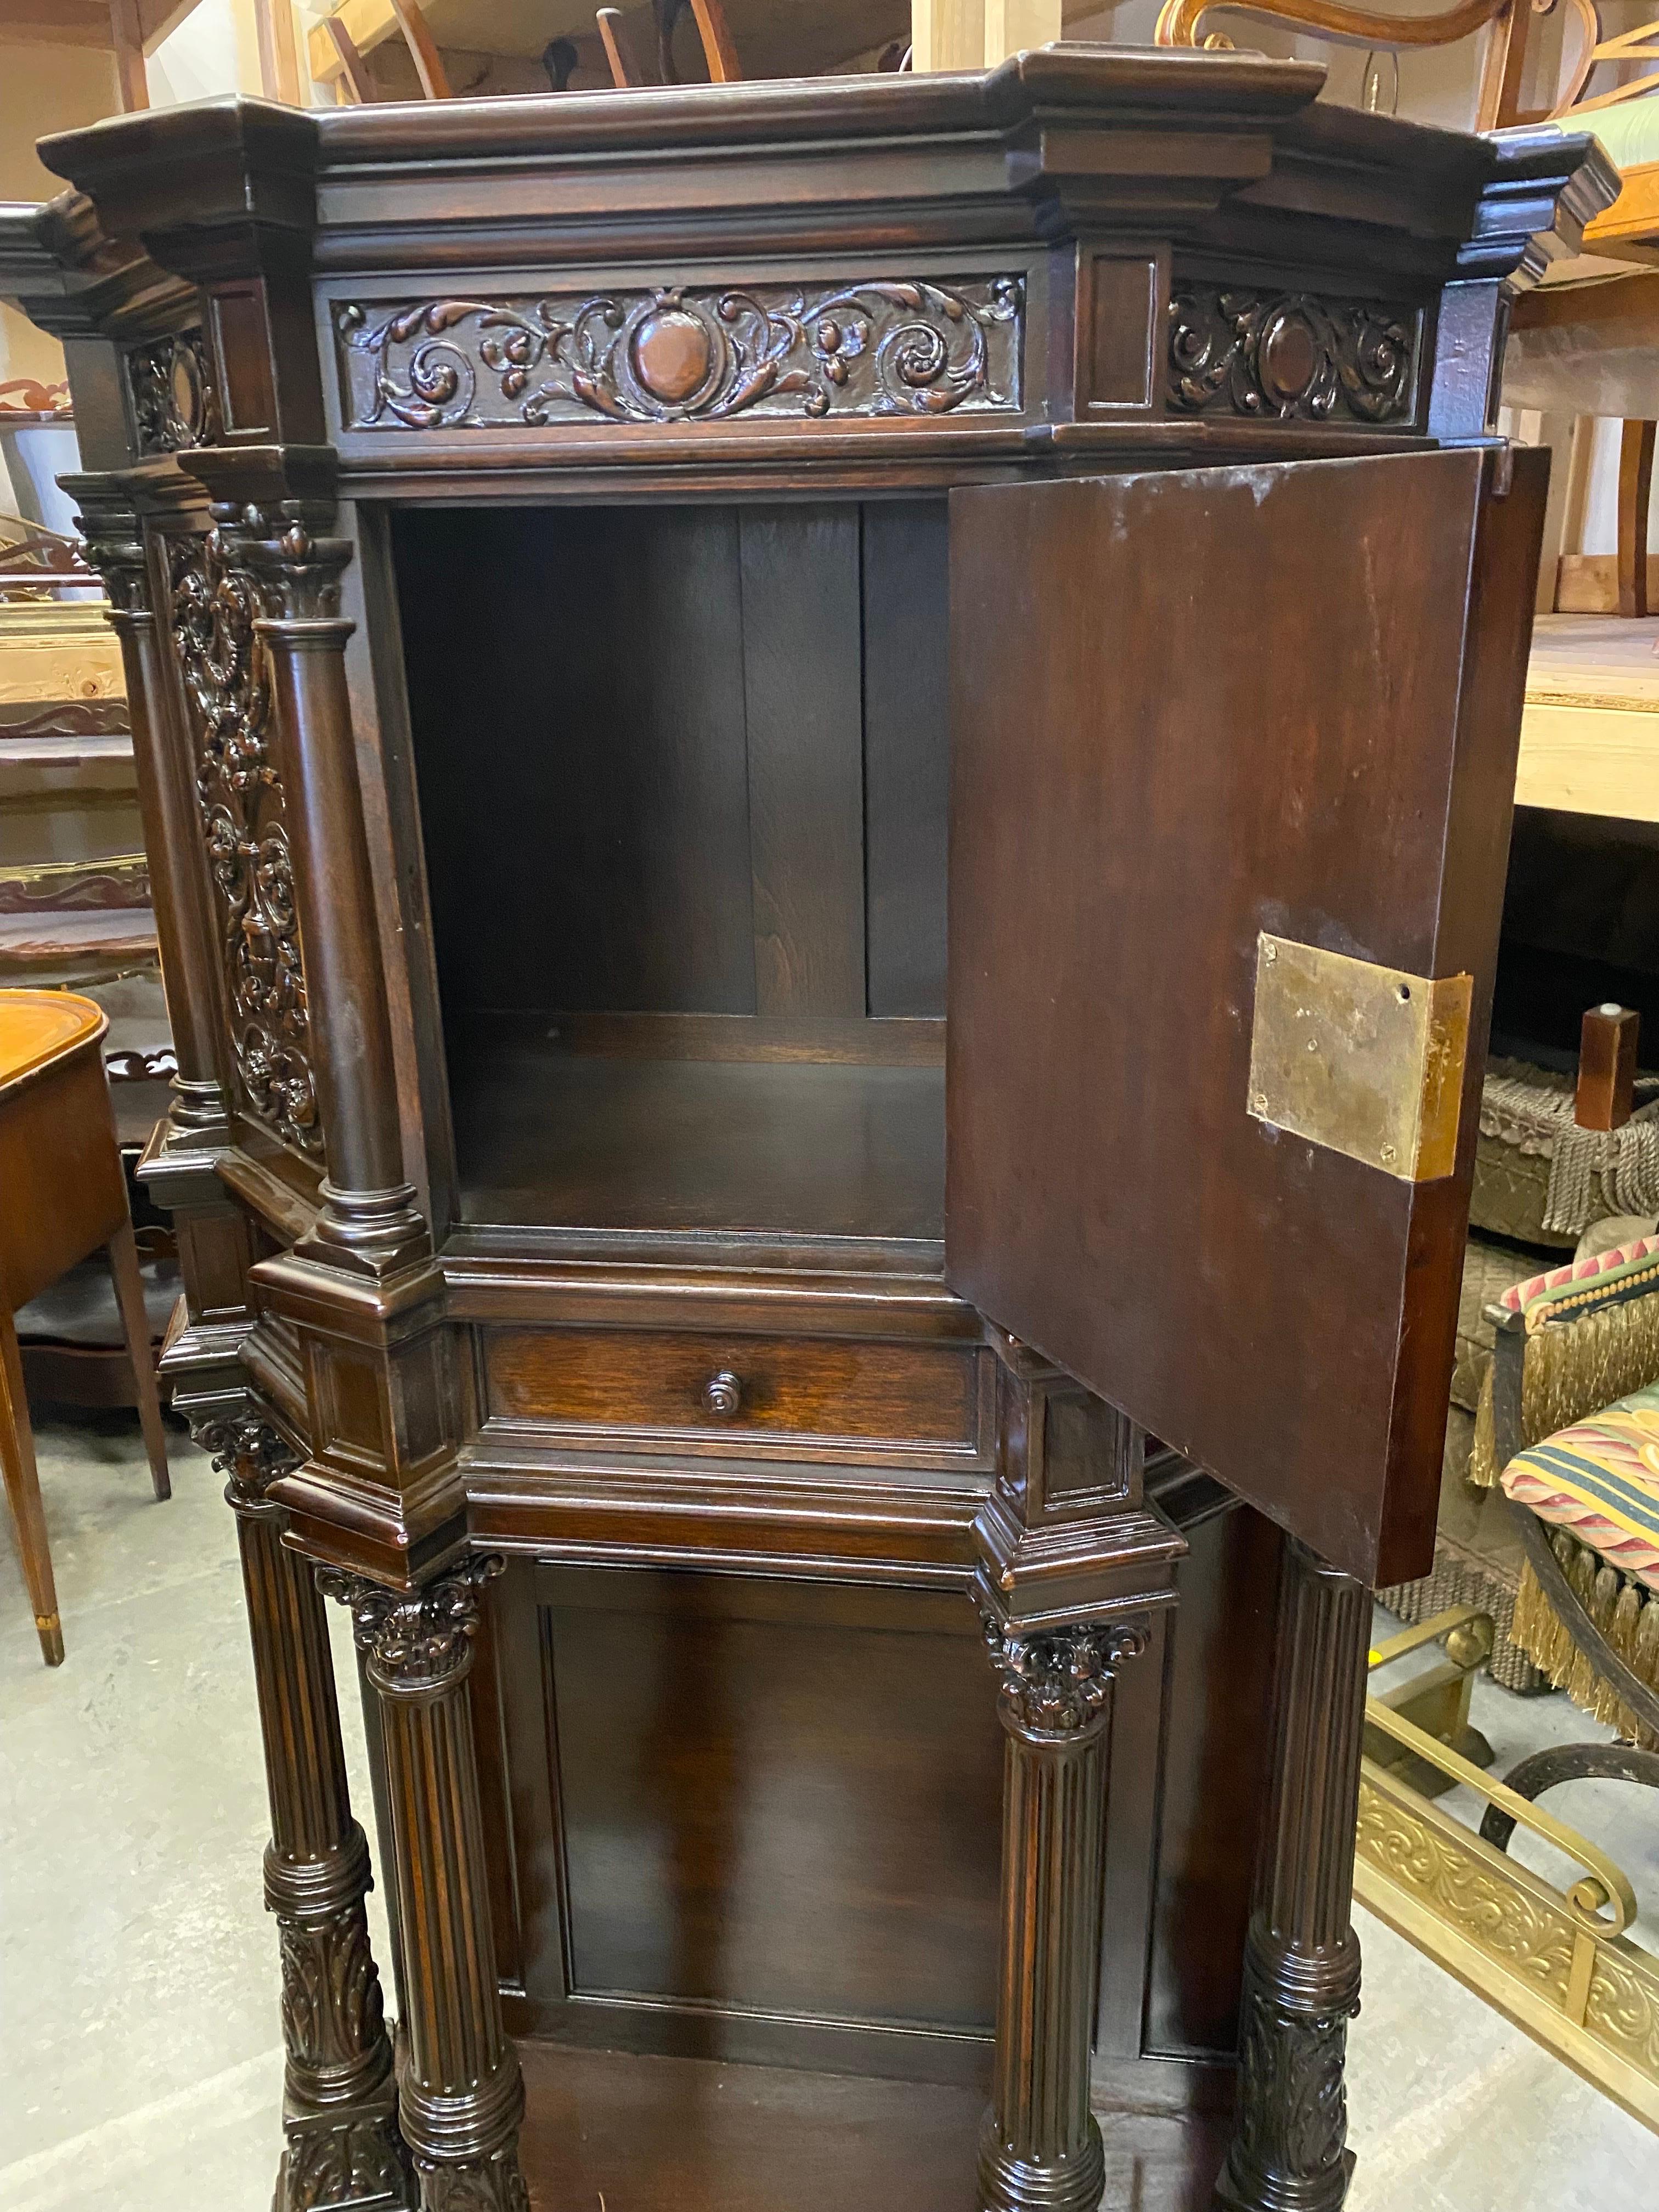 Handsome and stately hand carved English Tudor court cupboard. The top section with door with elaborately hand carved panels above a single drawer. the open storage base with carved columns with acanthus leaf at the bottom. This piece has been fully